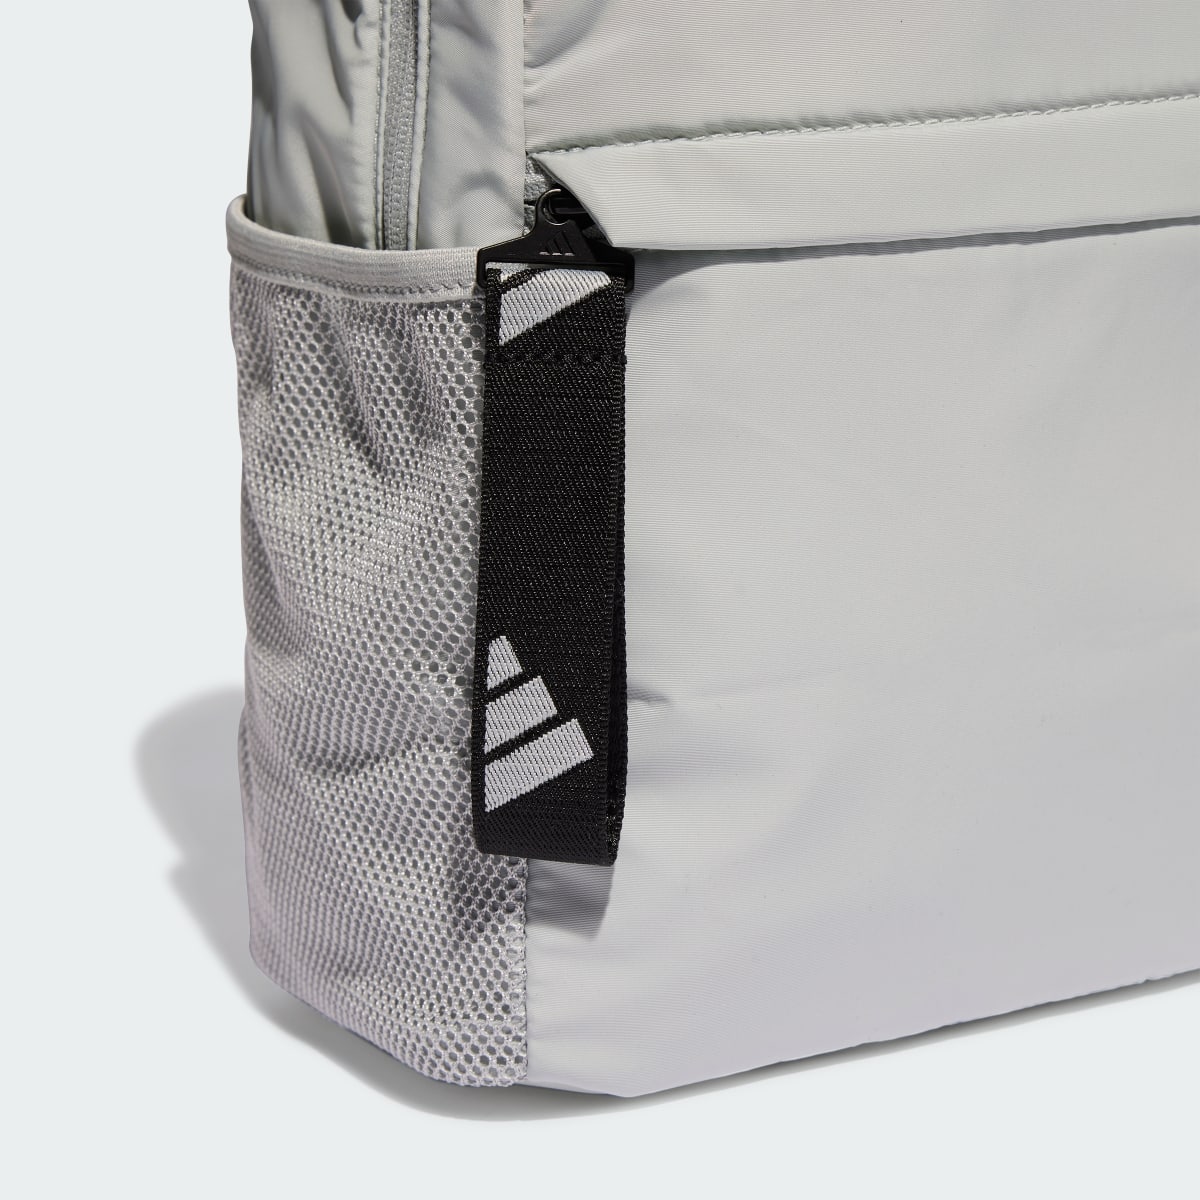 Adidas Sport Padded Backpack. 6